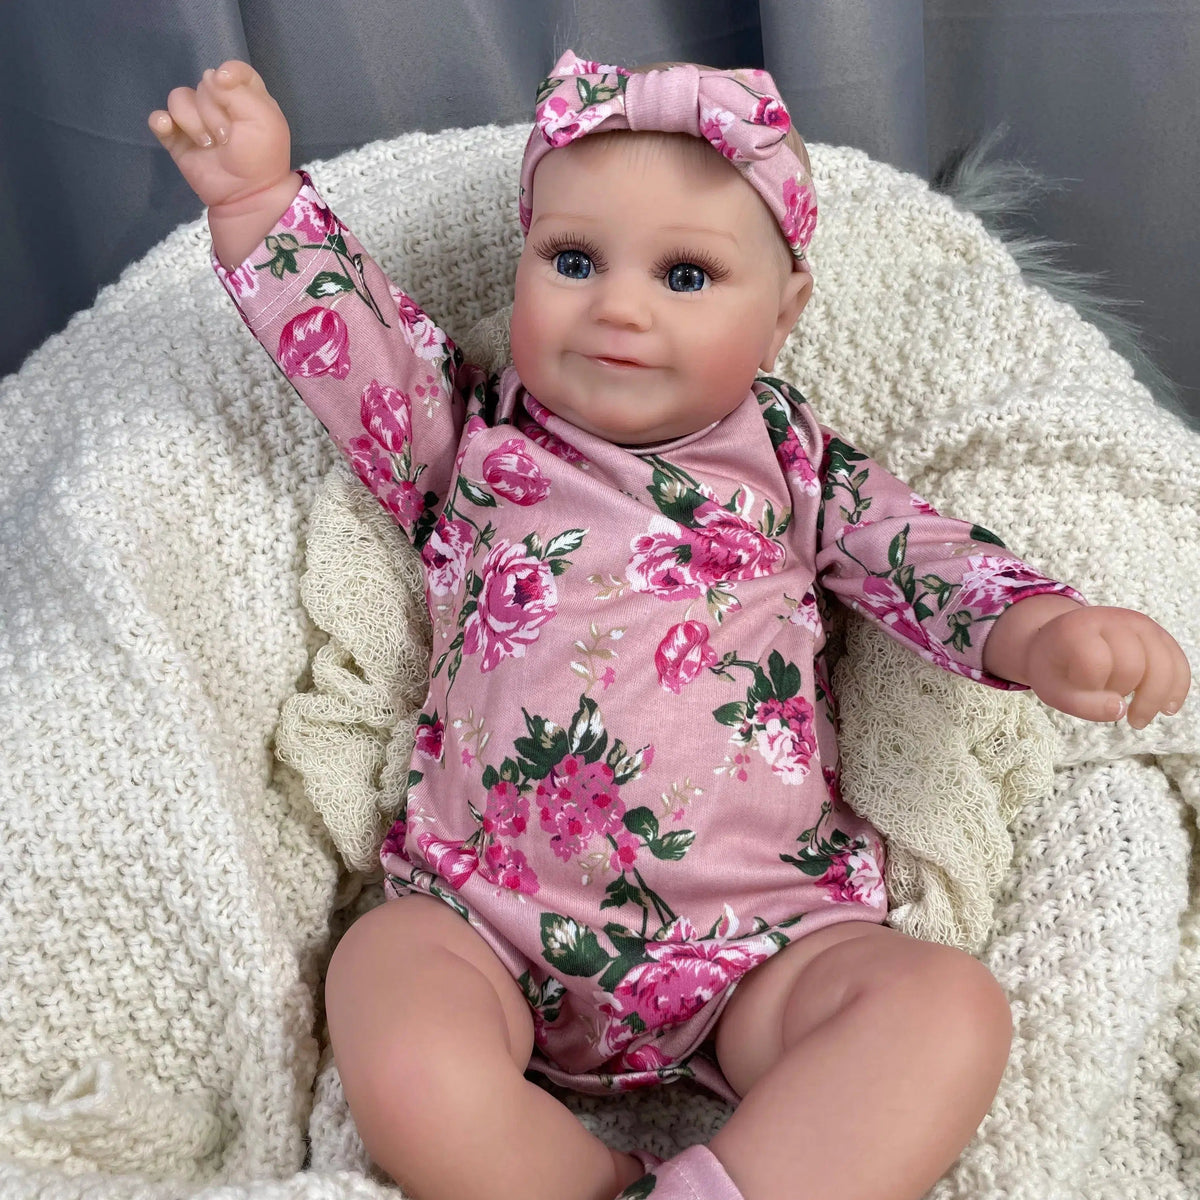 50CM Reborn Baby Dolls Maddie Girl Lifelike Silicone Vinyl Newborn 3D Skin Visible Veins DIY Toys Christmas Gift For Girls-Maternity Miracles - Mom & Baby Gifts